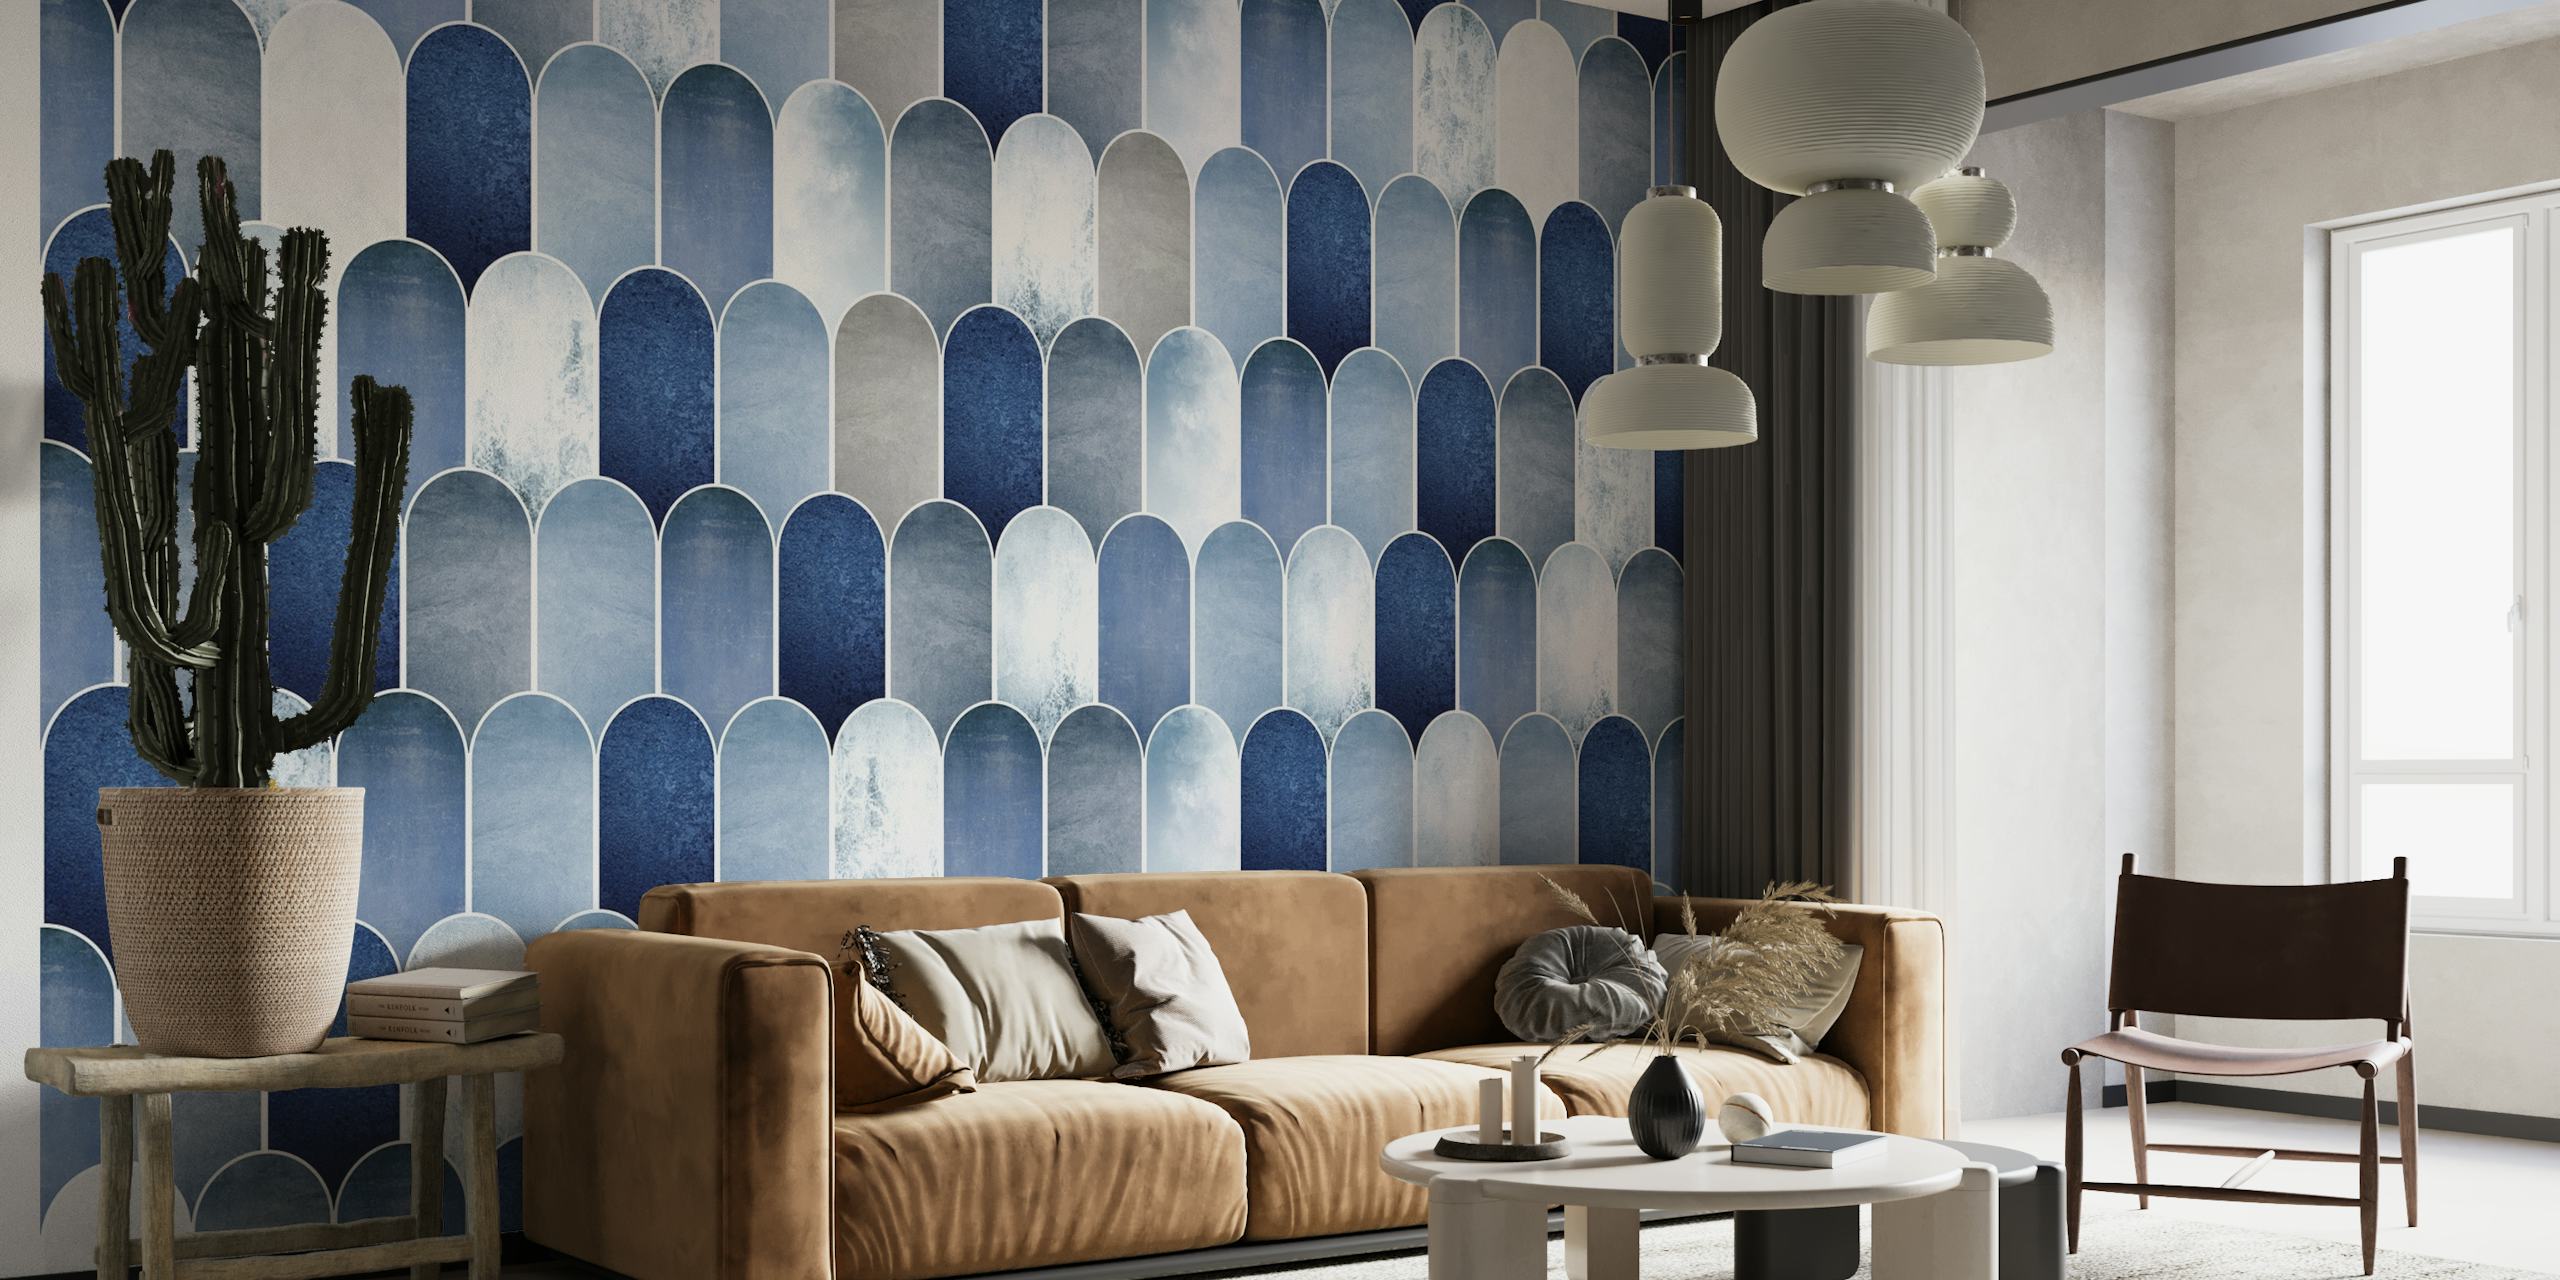 Tiled Wall in Blue and Grey ταπετσαρία